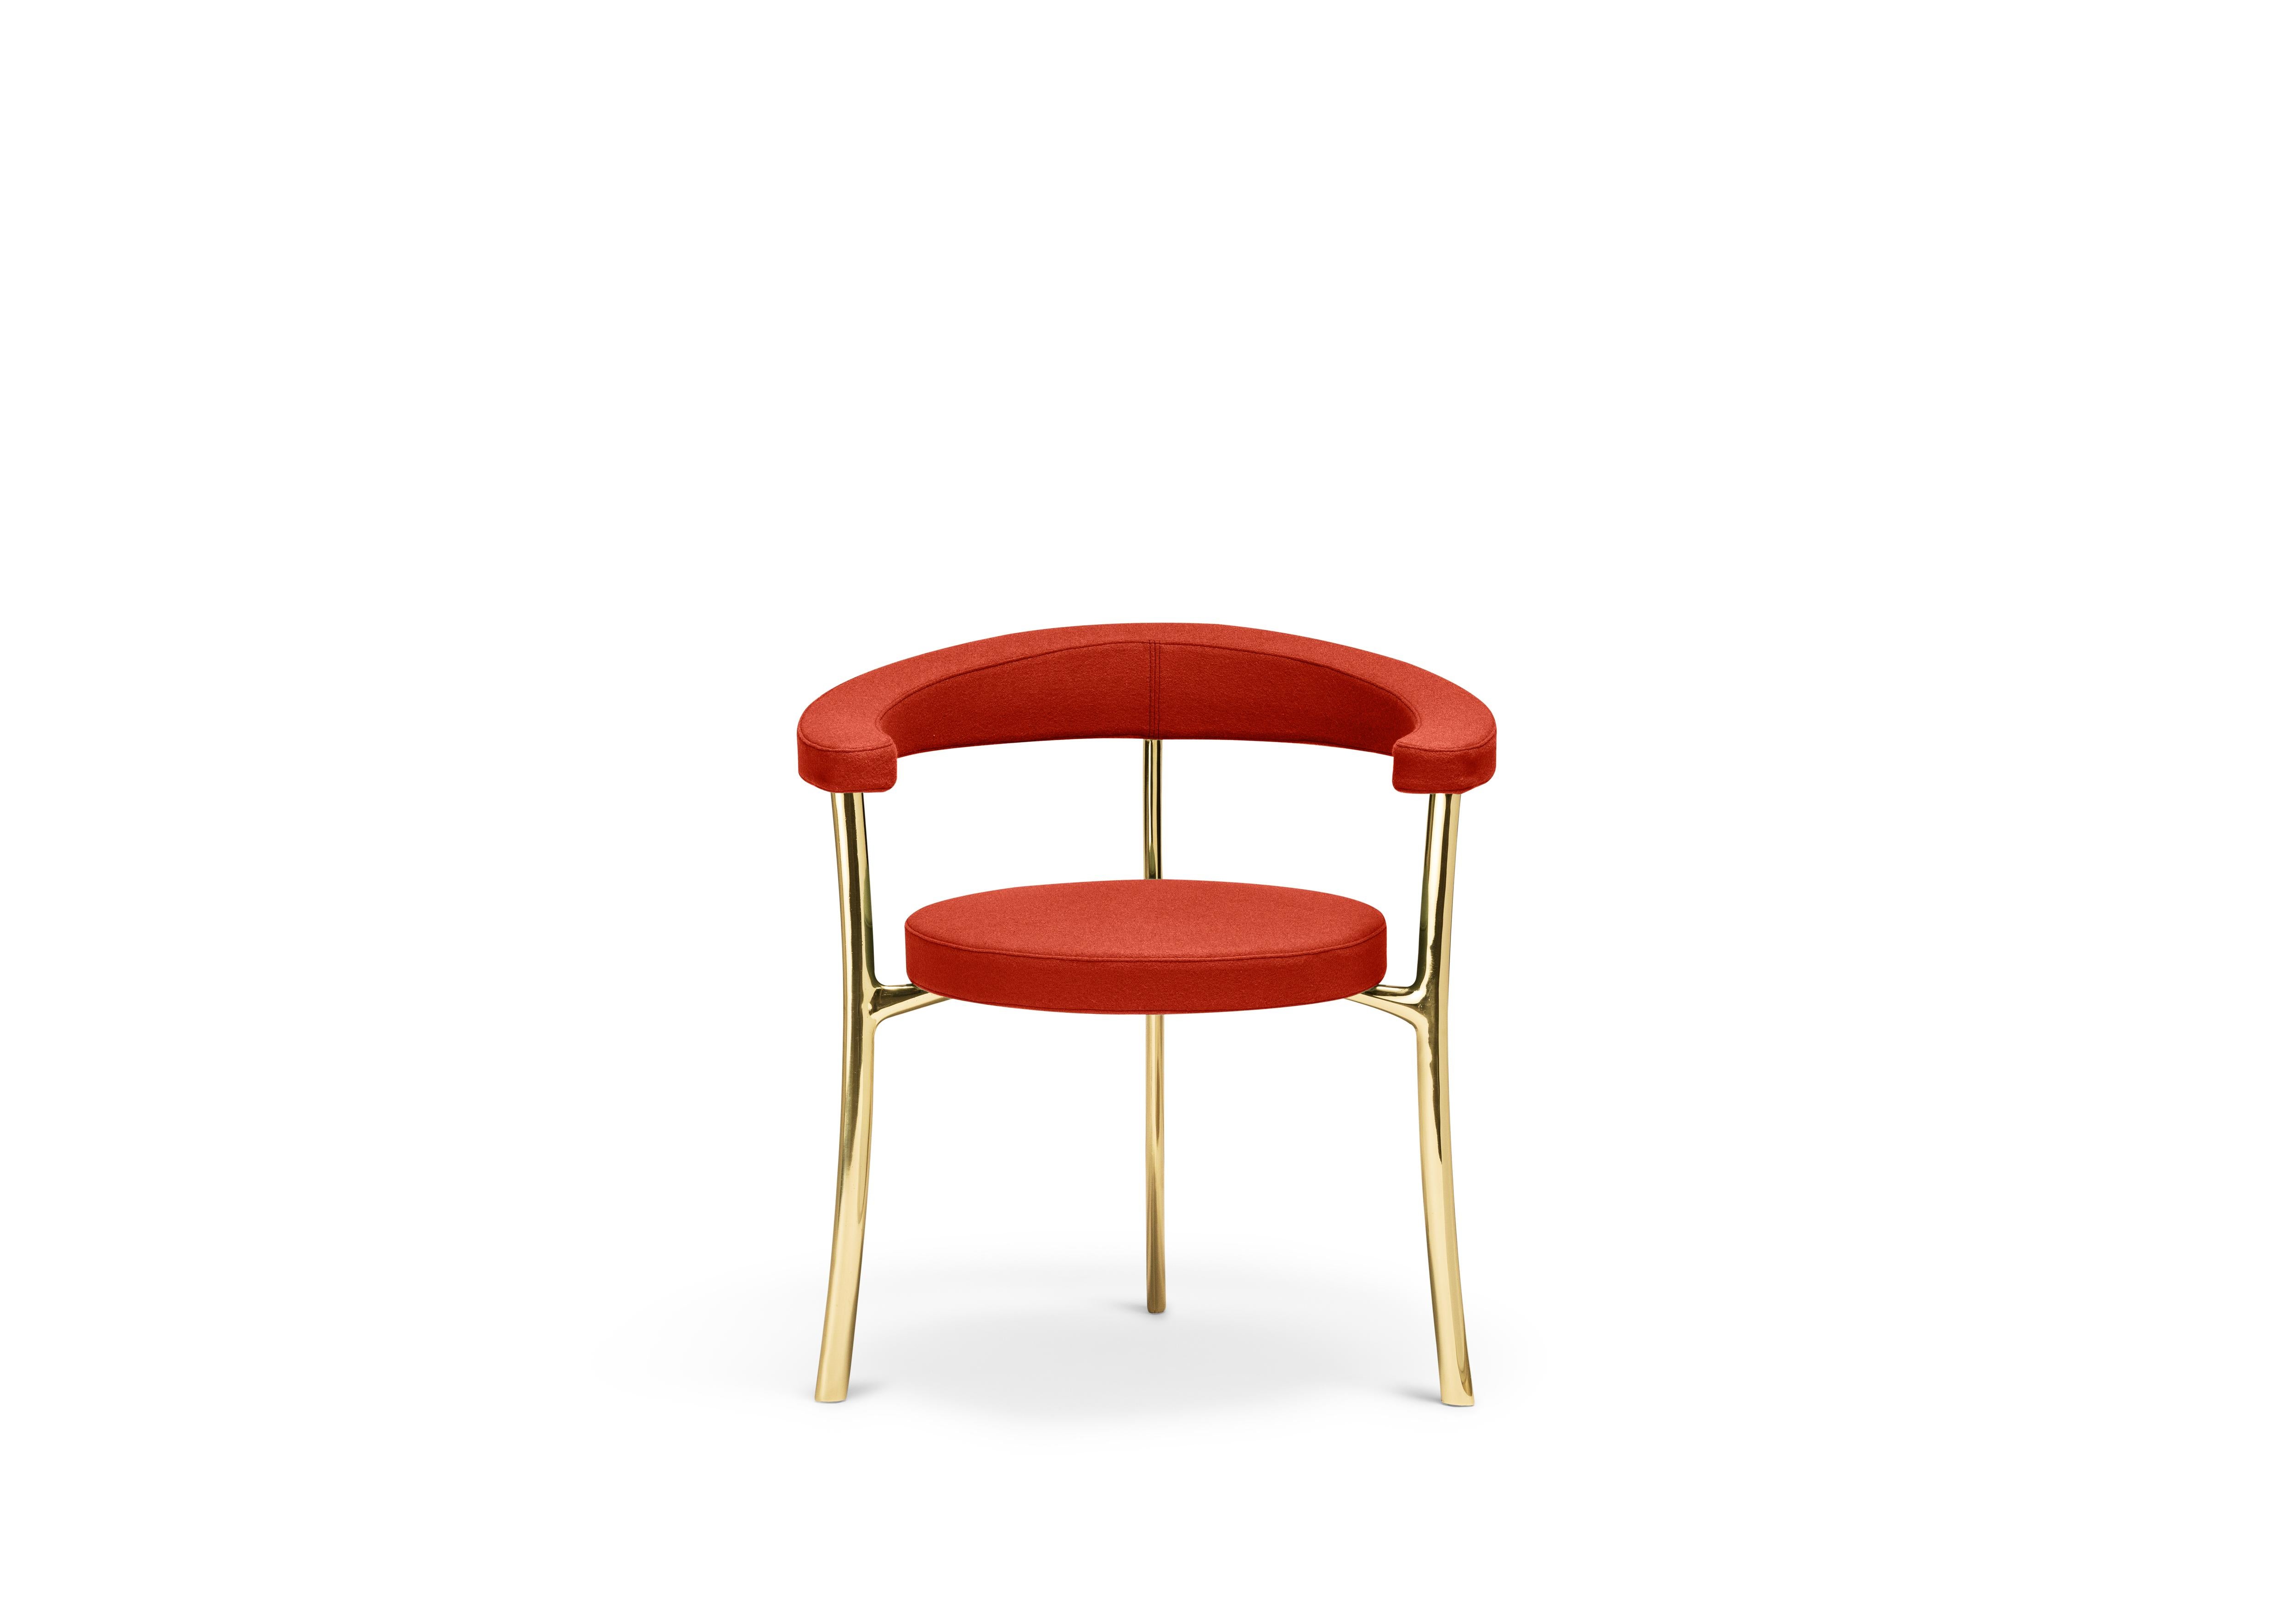 For Sale: Orange (f-1241-c0551) Ghidini1961 Katana Armchair in Fabric with Polished Brass Legs by Paolo Rizzatto 2